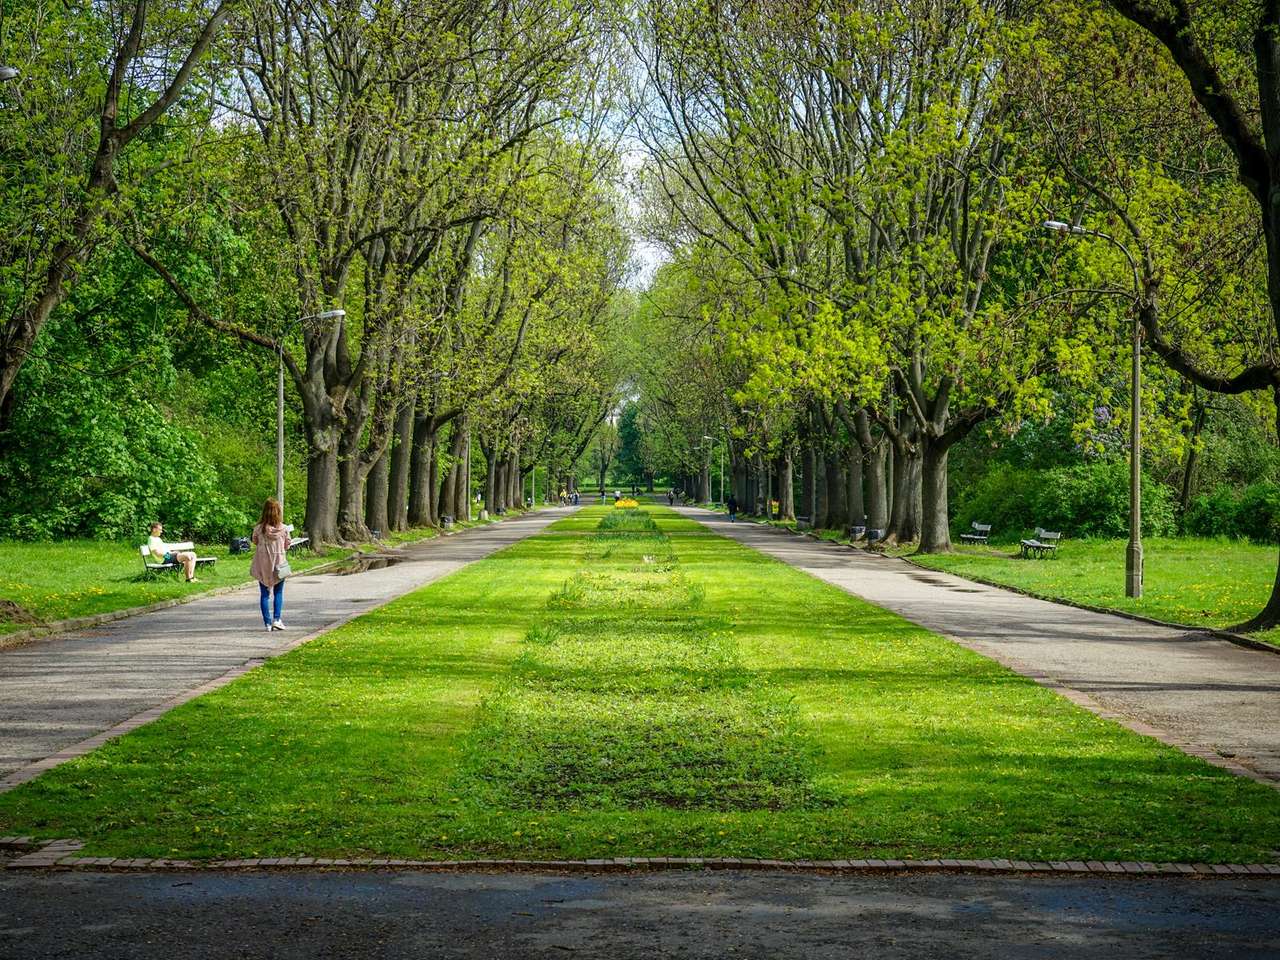 A nice green park over there puzzle online from photo